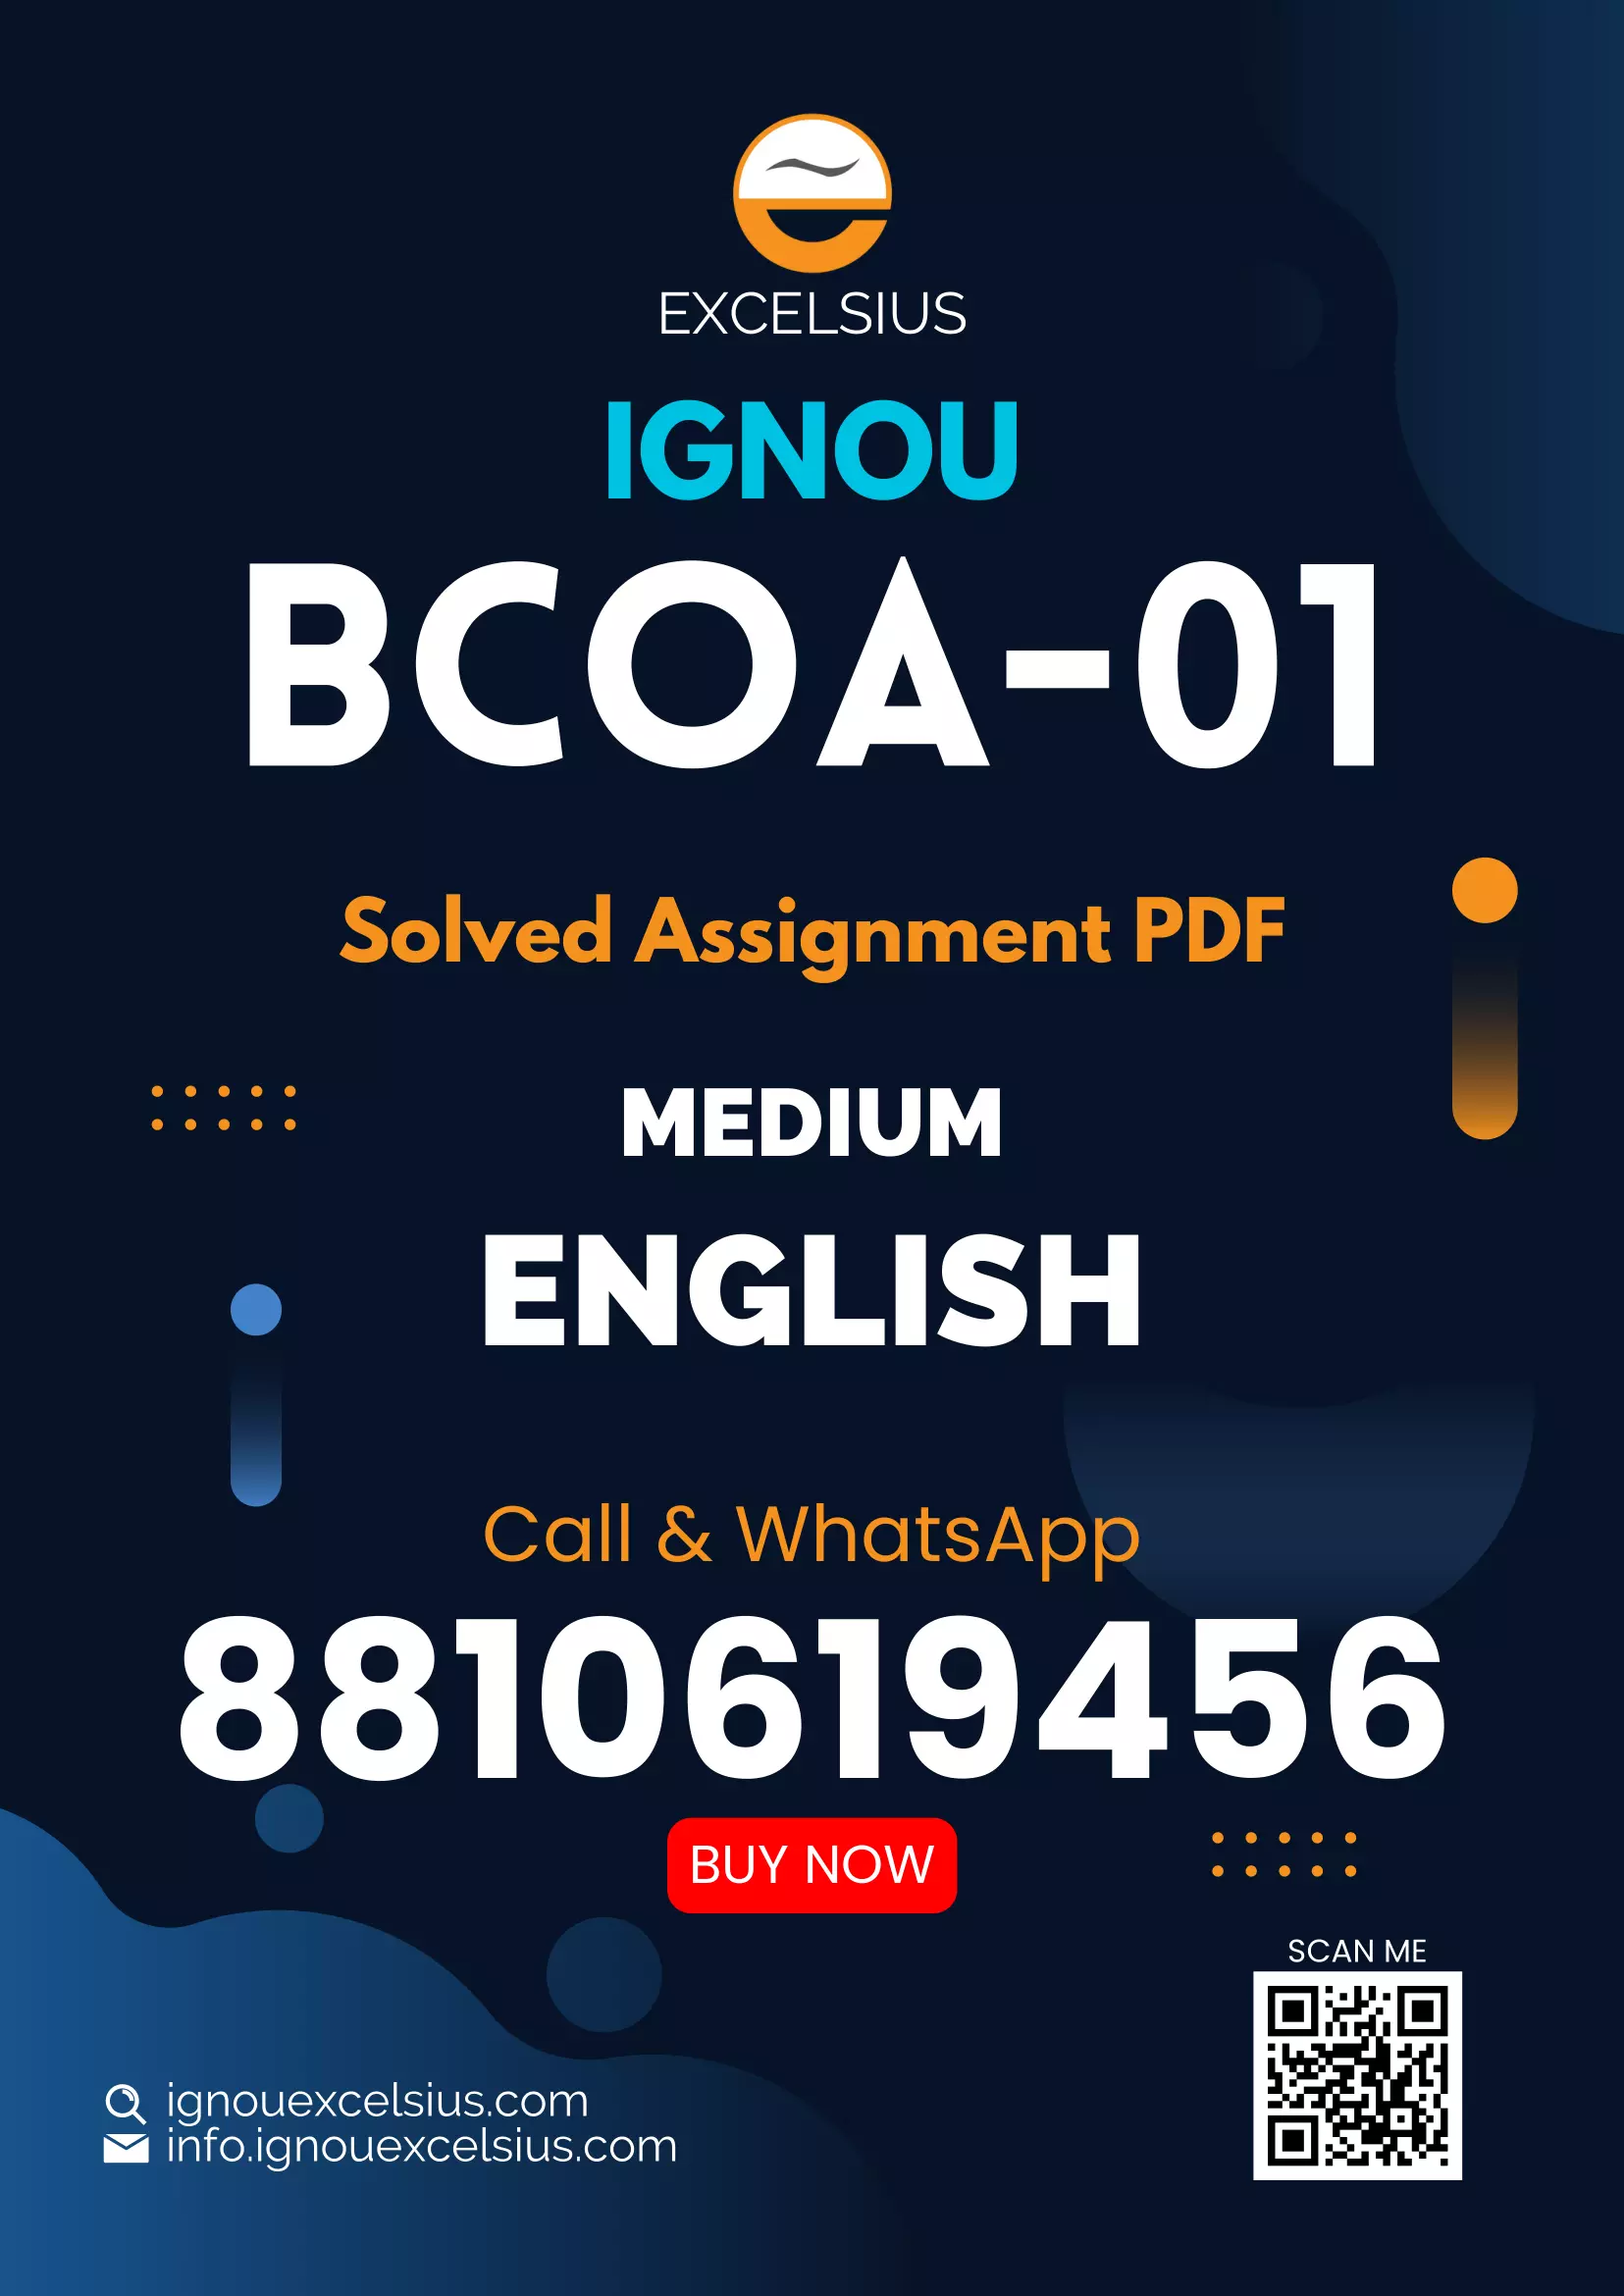 IGNOU BCOA-01 - Business Communication and Entrepreneurship, Latest Solved Assignment-July 2022 – January 2023